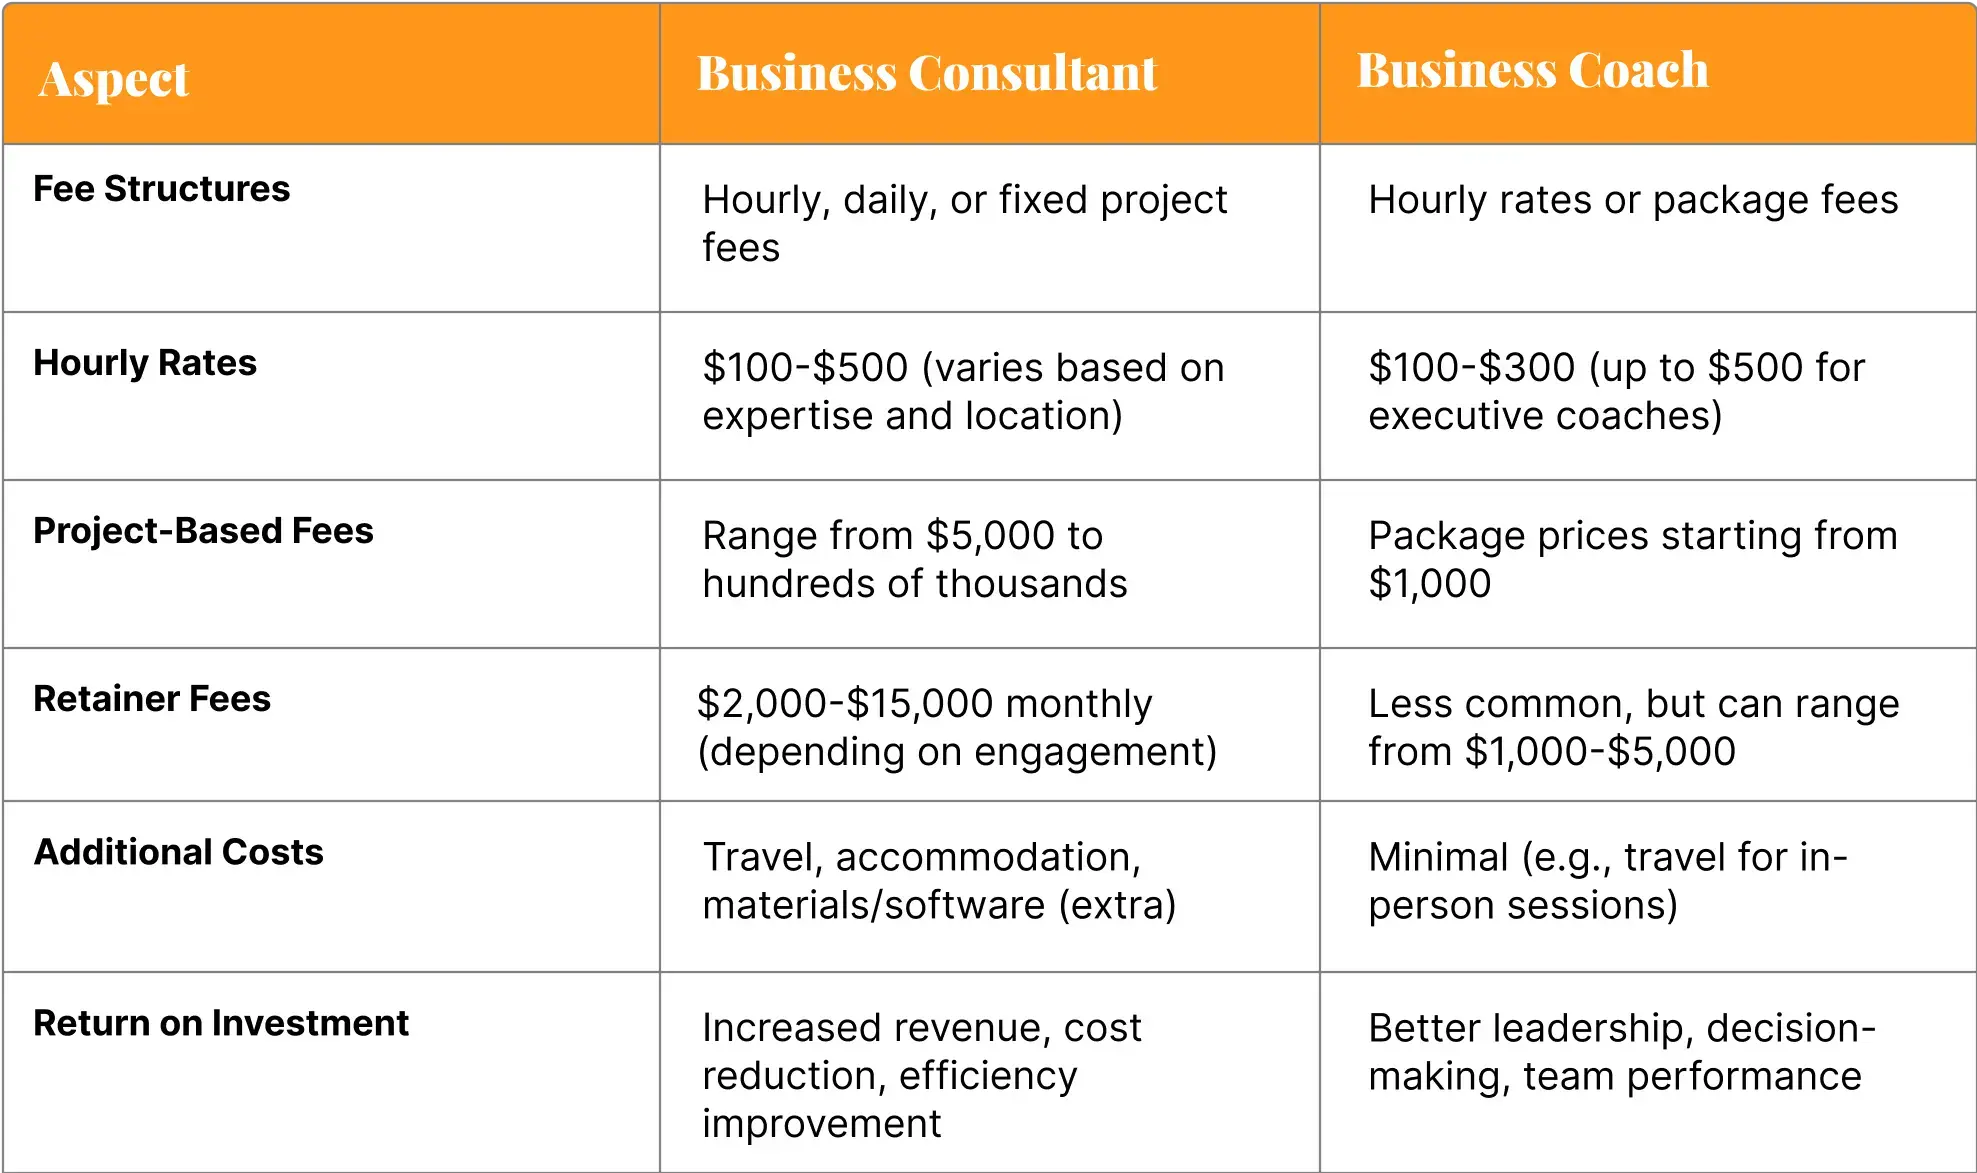 comparison-table-hiring-cost-business-consultant-vs-a-business-coach